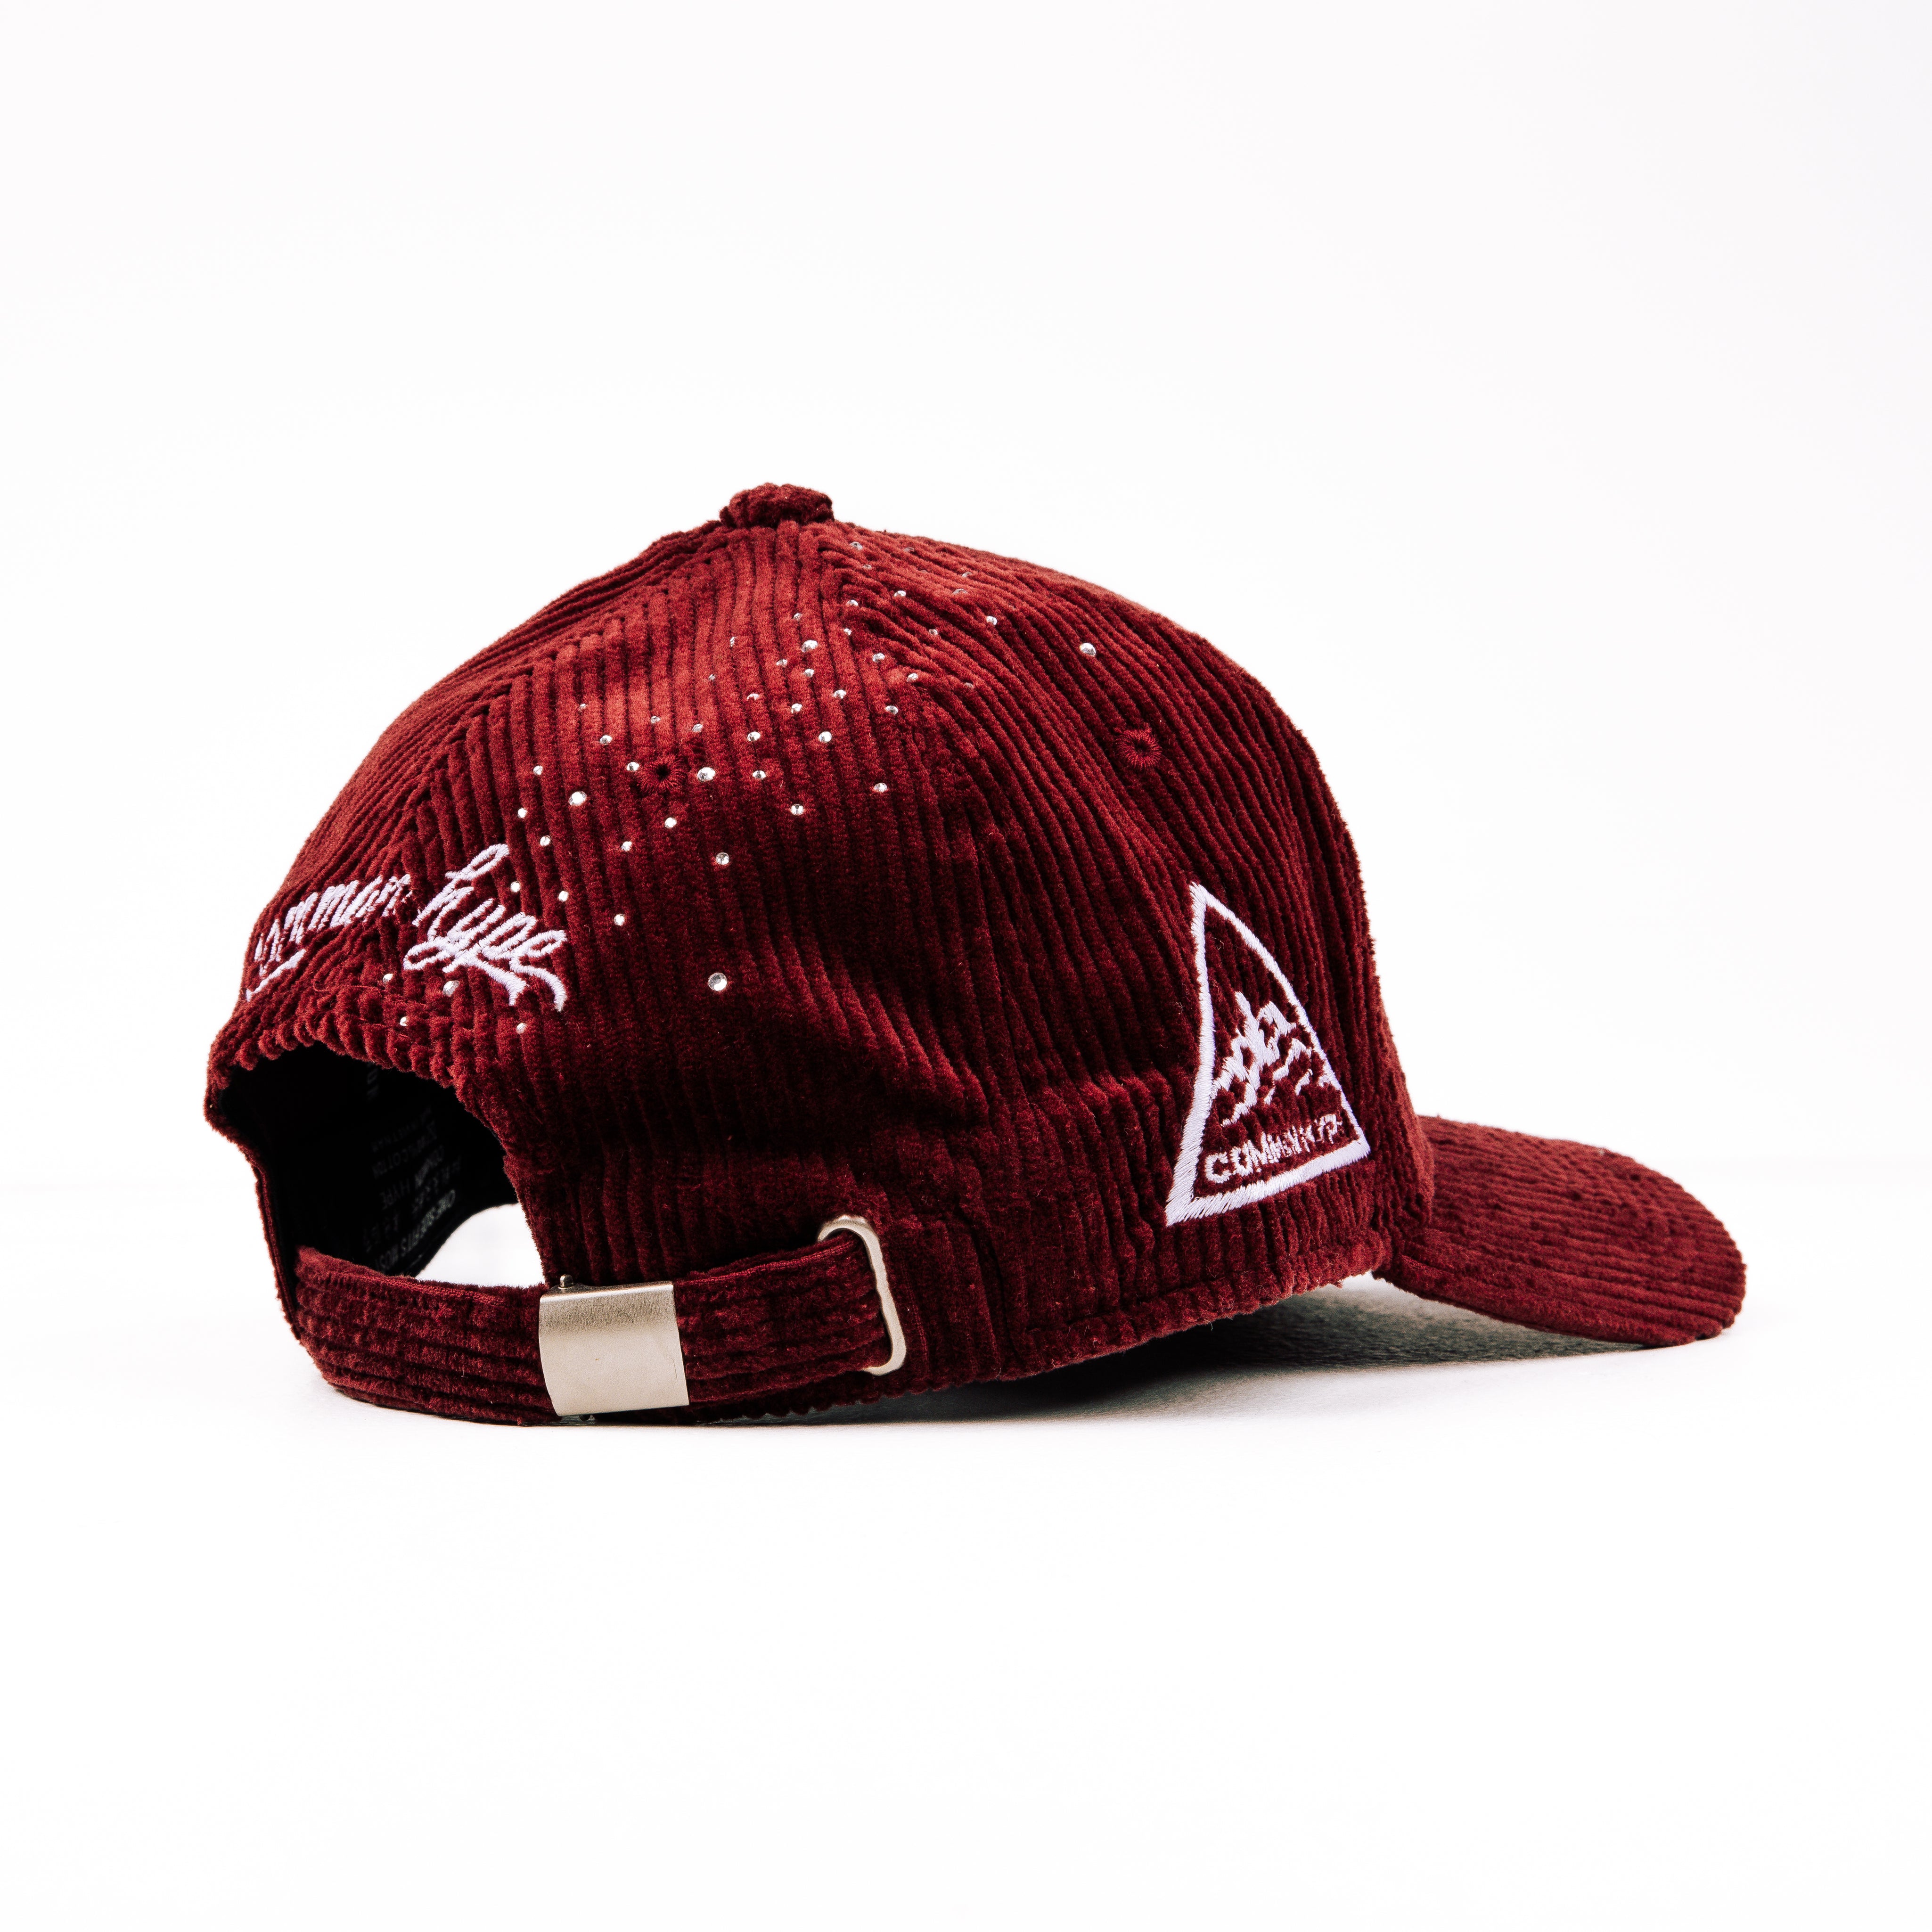 Common Hype “Crystal’d” Corduroy Hat (1 of 1) - H14